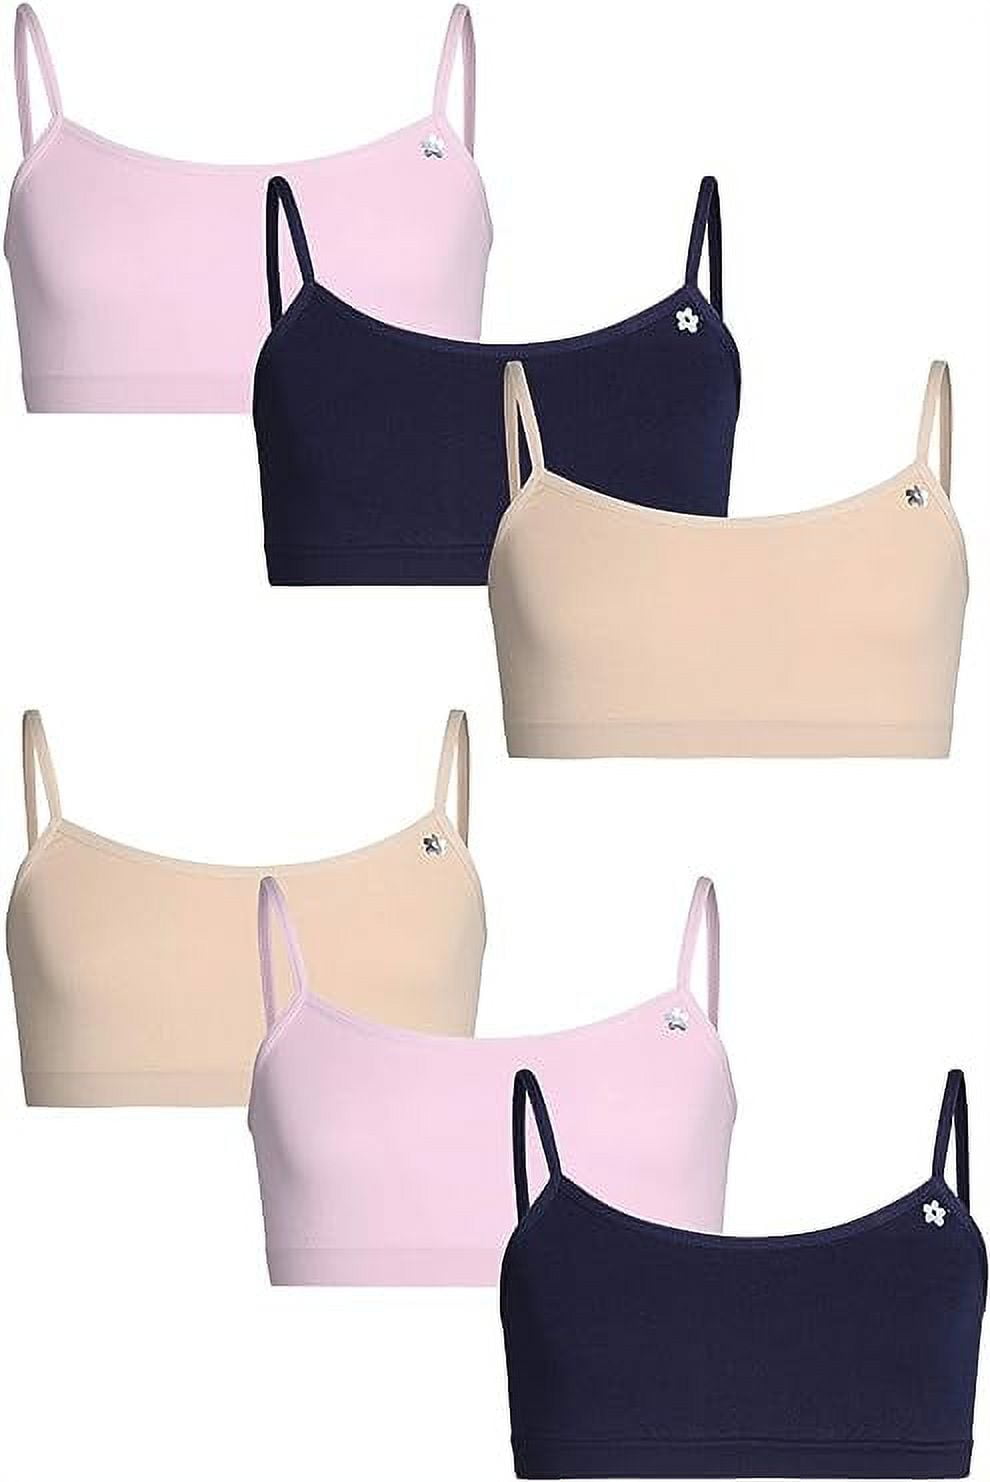 Limited Too Girls' Training Bra - 6 Pack Seamless Cami Bralette